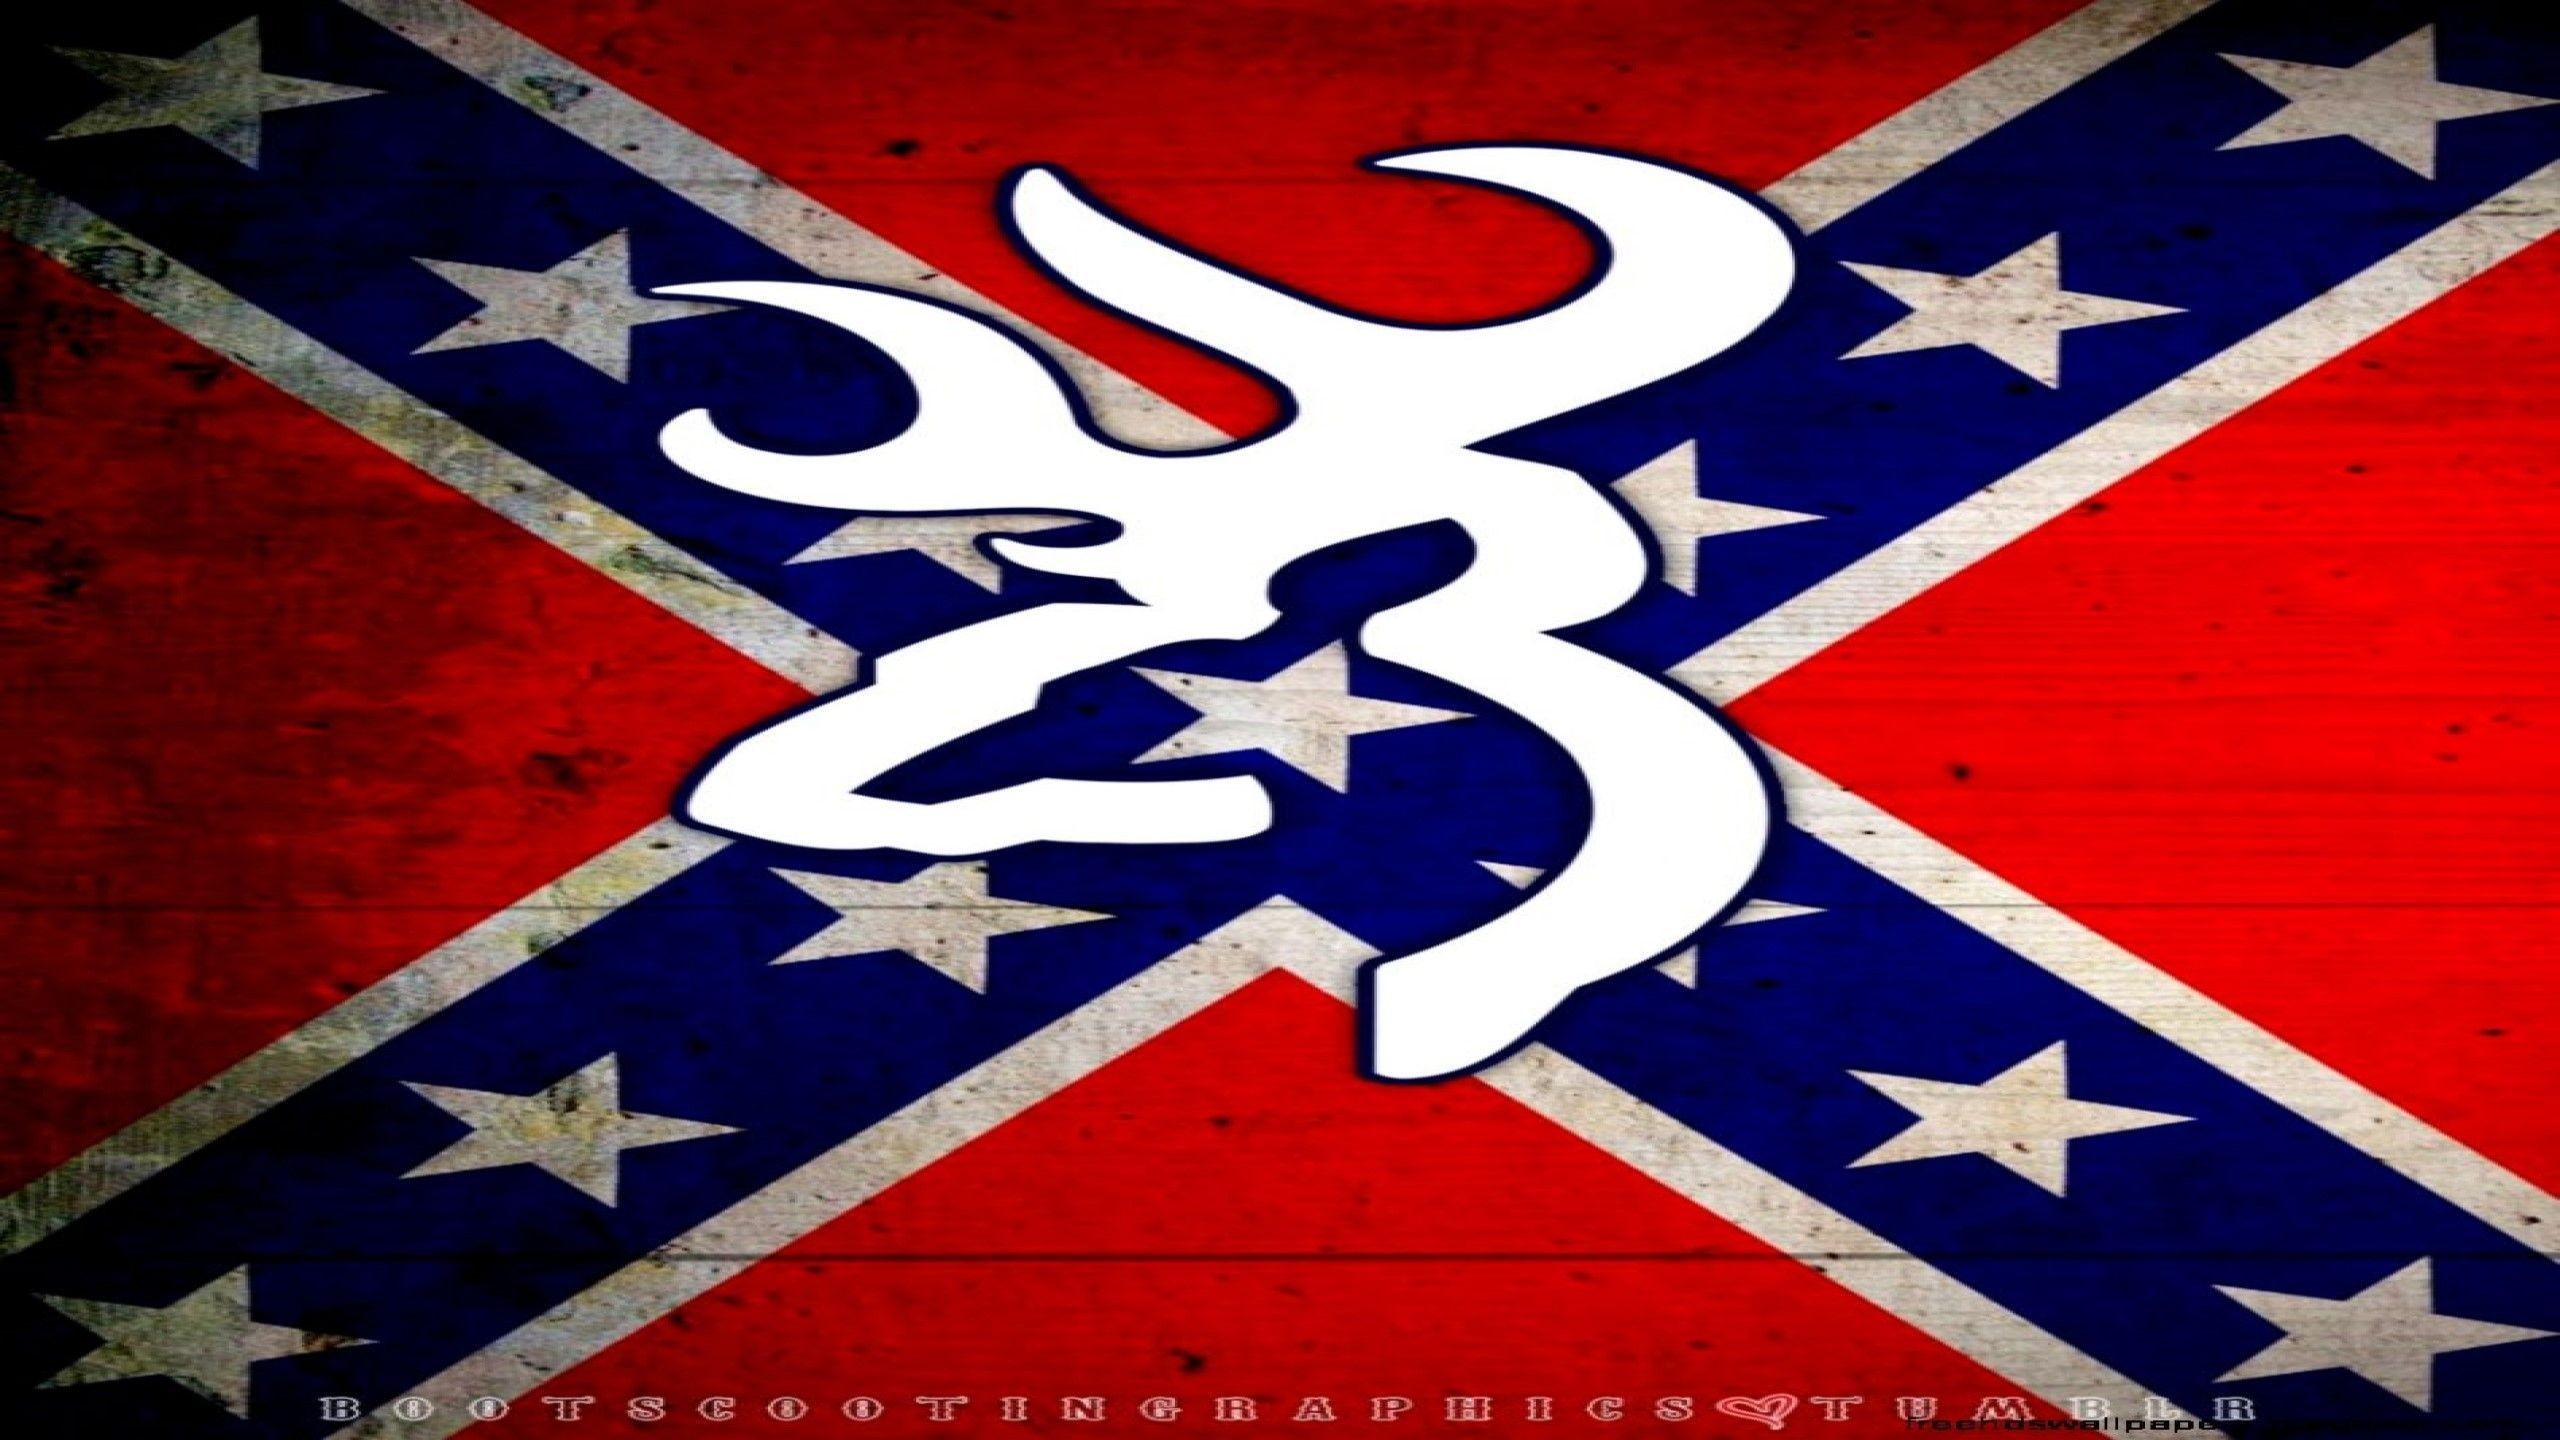 HD wallpaper confederate flag hd backgrounds white background patriotism   Wallpaper Flare